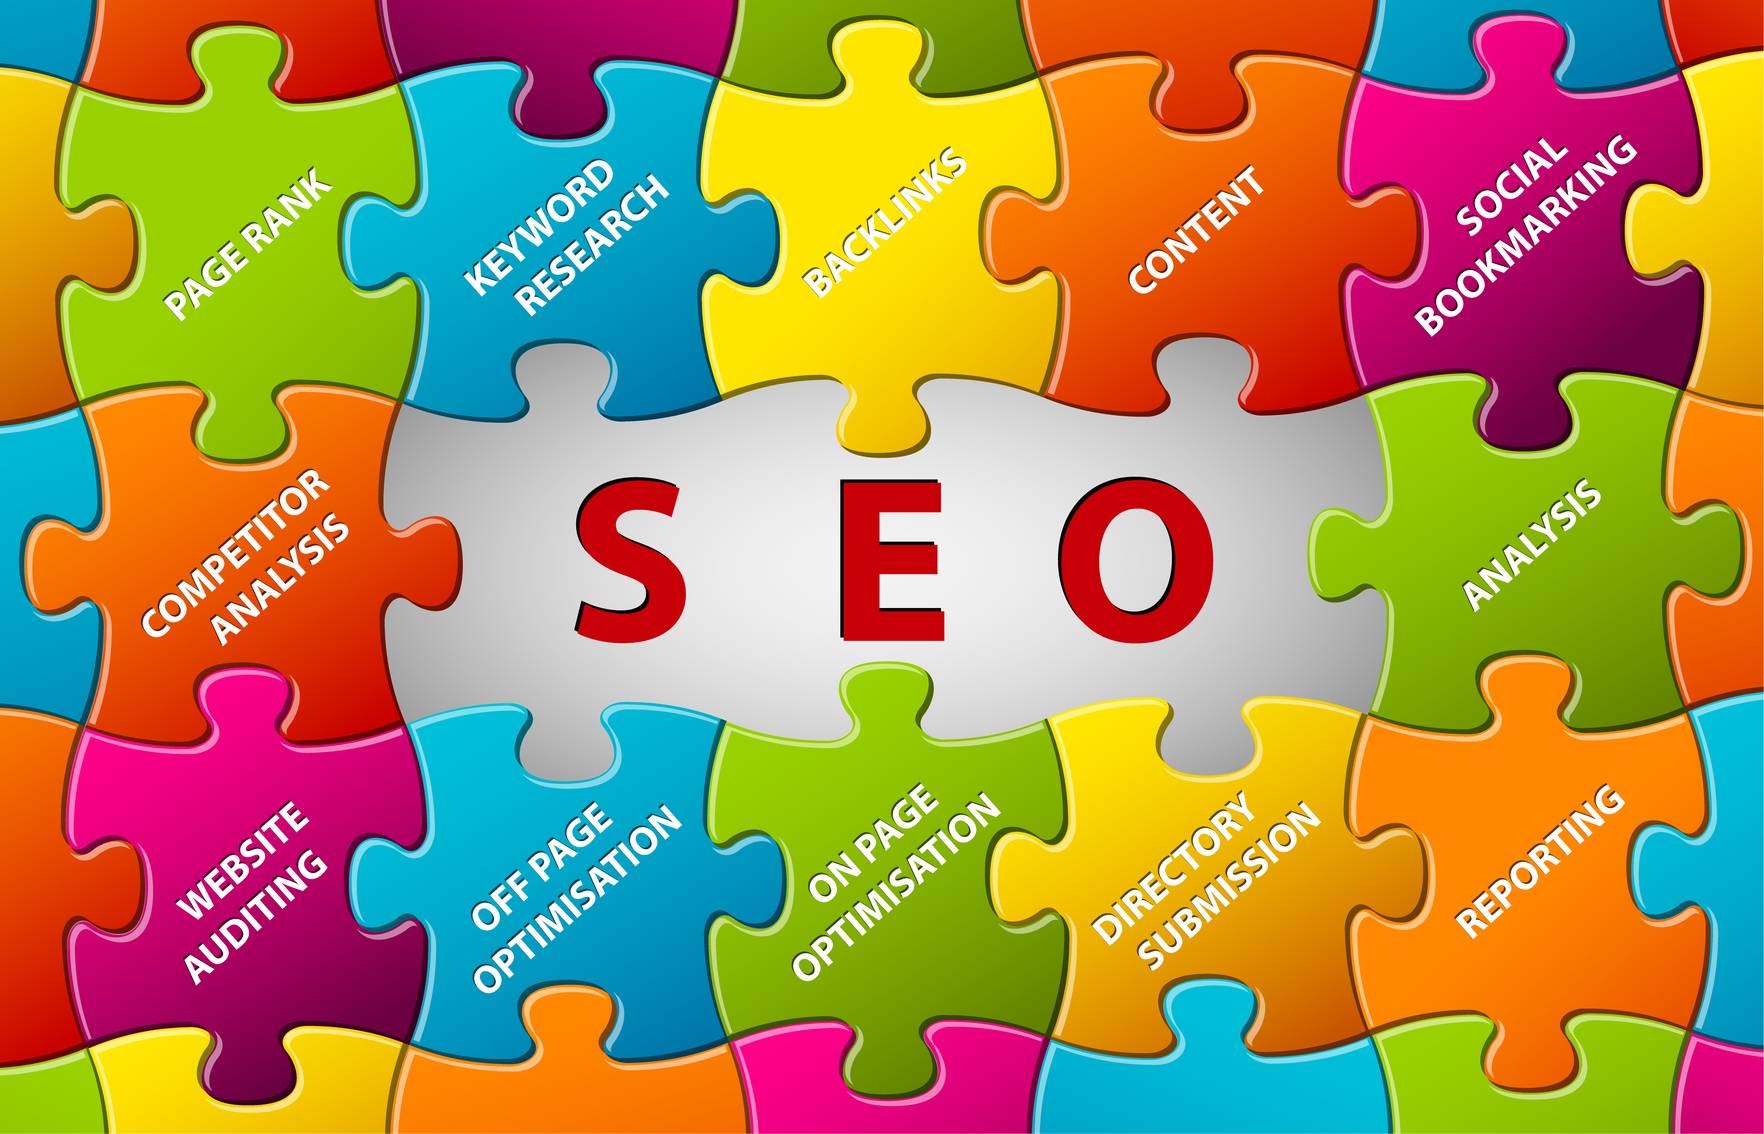 McKinney TX SEO: We’ll Help You Get It Right